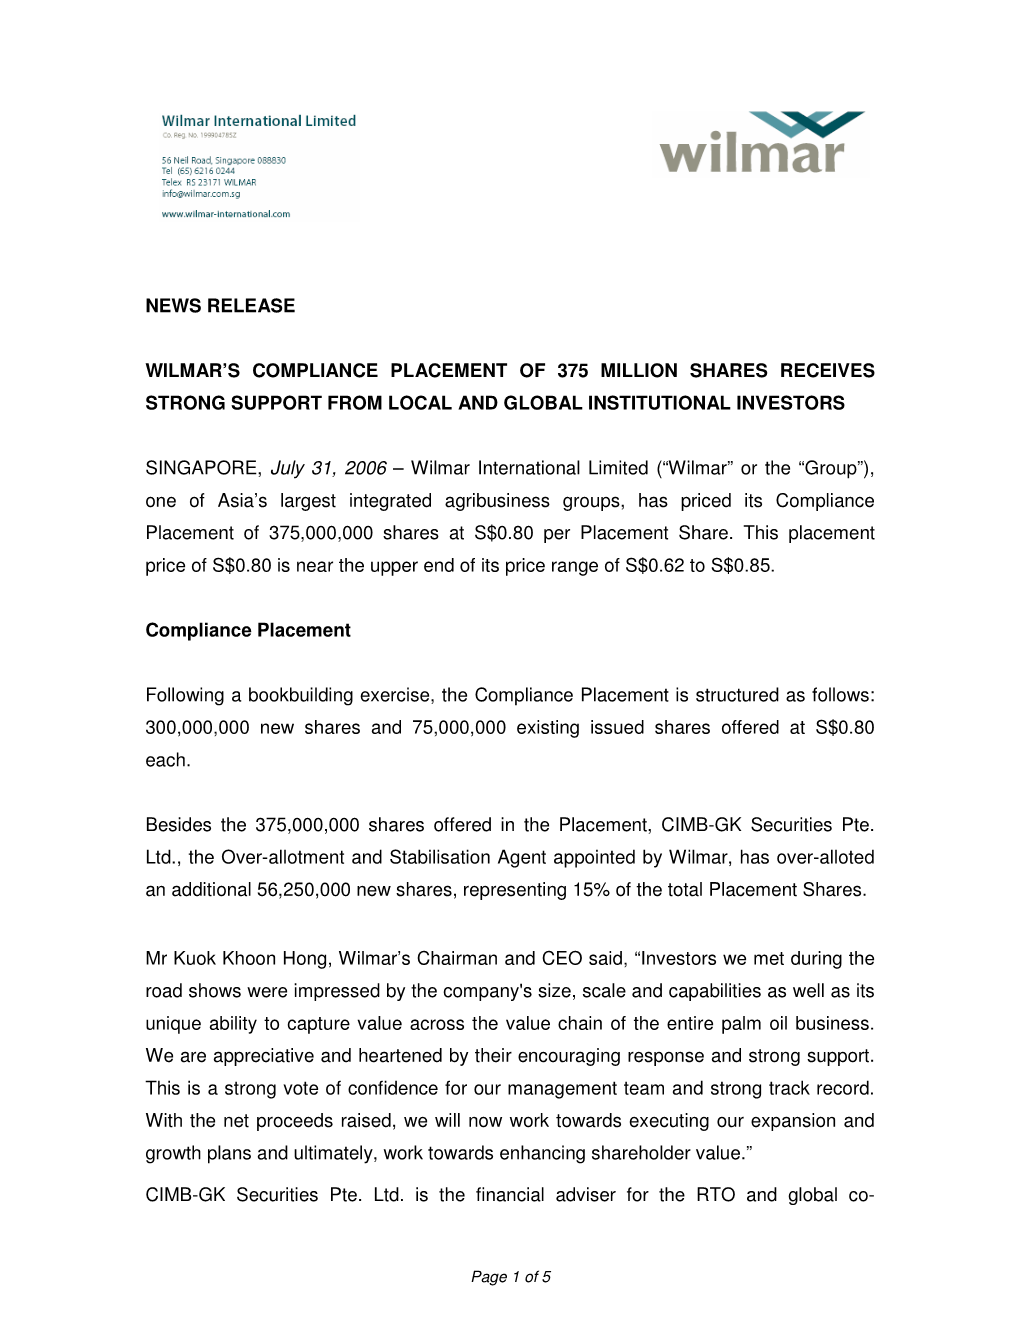 News Release Wilmar's Compliance Placement Of